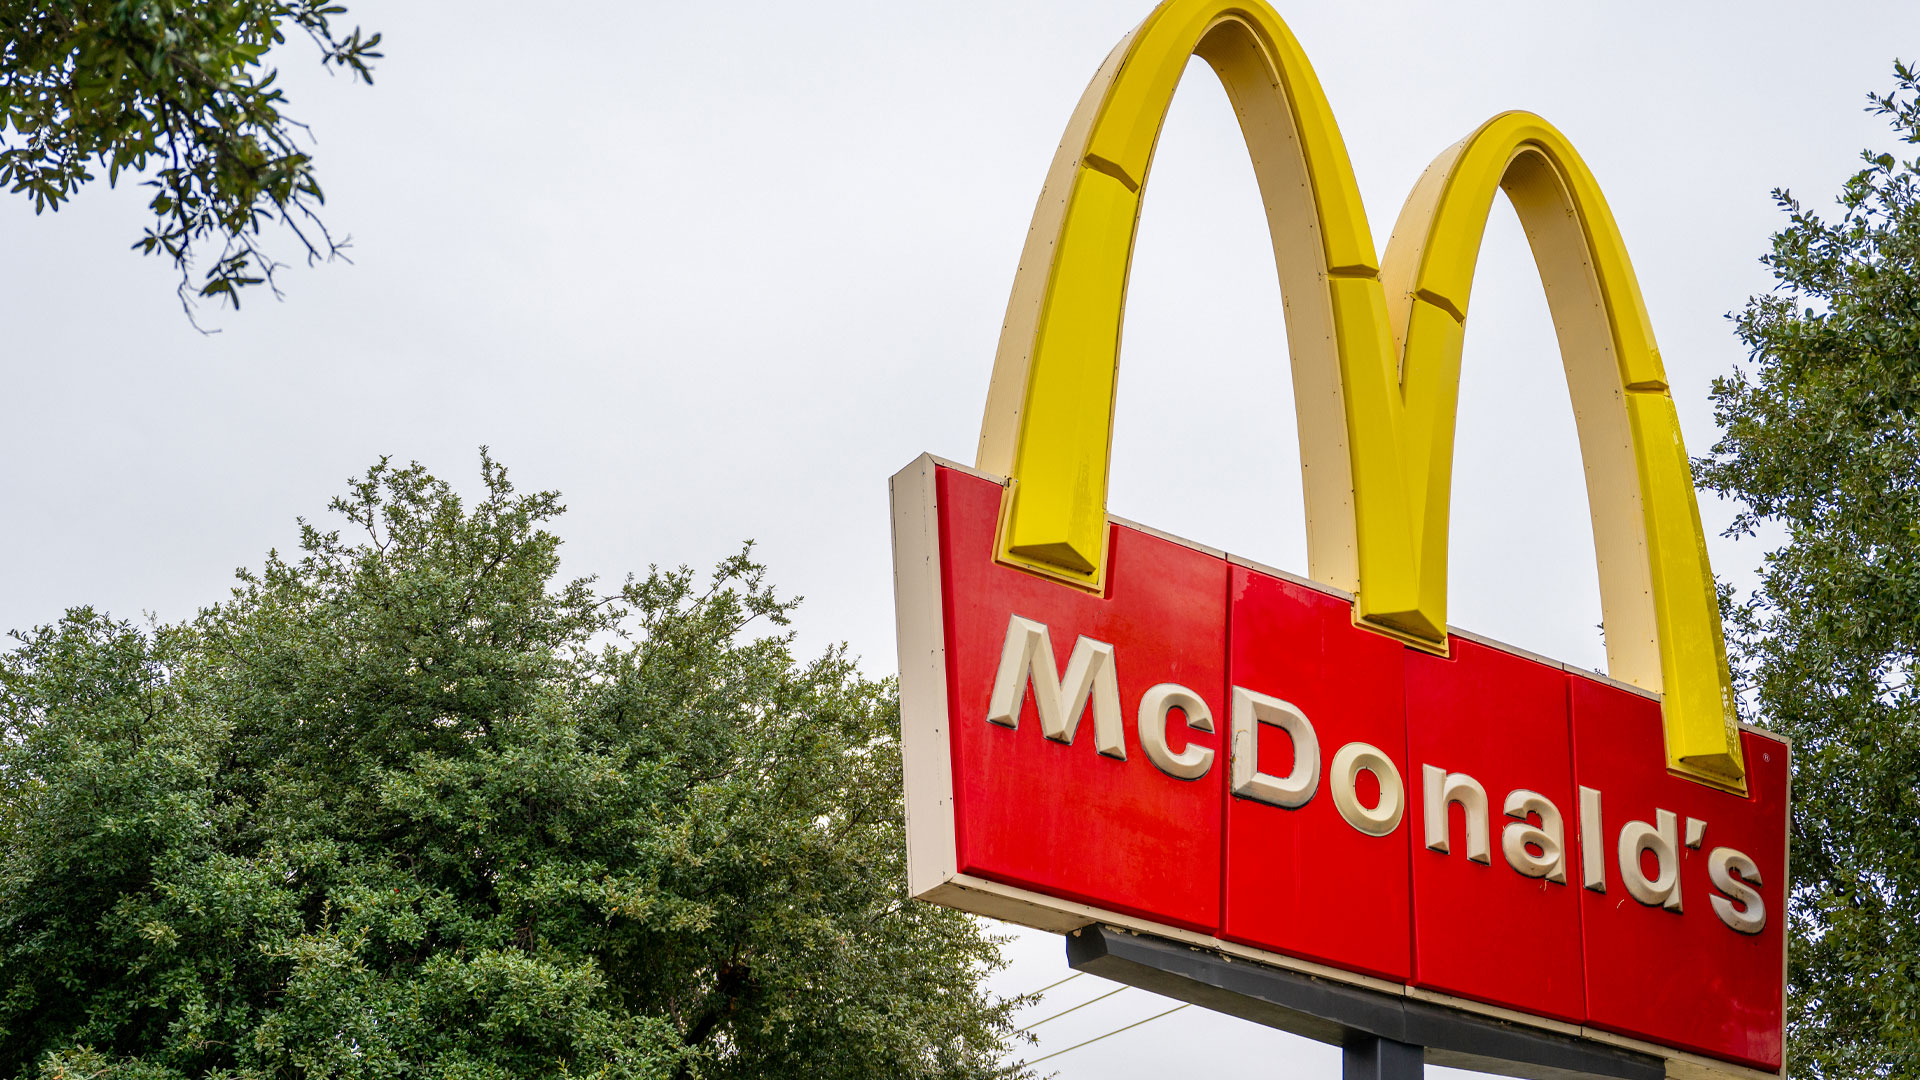 McDonald’s wants to lure back customers with surprise specials as CFO looks to the ‘entry meal’ as cheap option [Video]